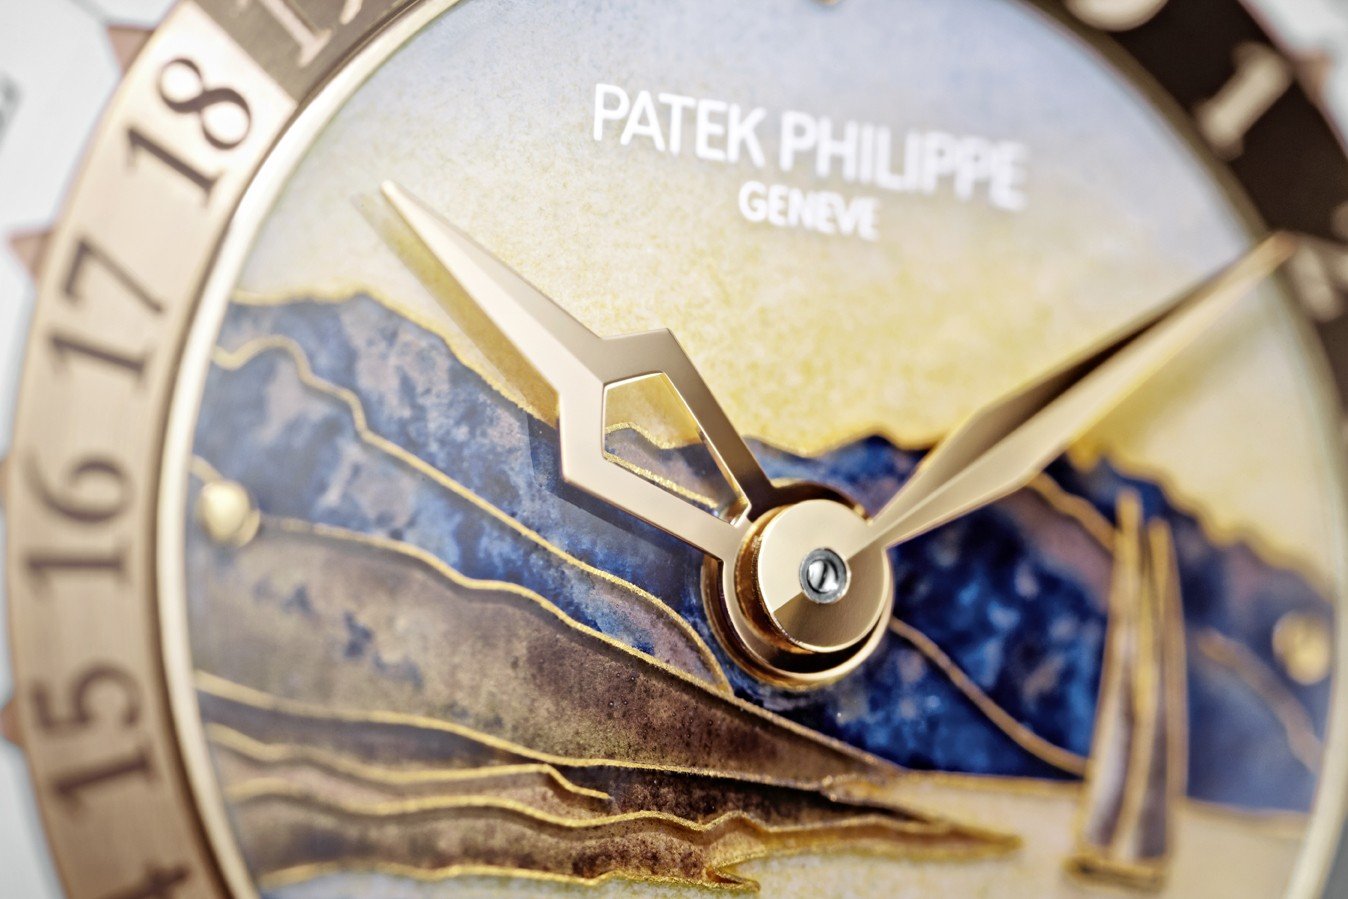 Thierry Stern, president of Swiss luxury watchmaker Patek Philippe, says he remains ‘quite satisfied’ with its sales around the world.